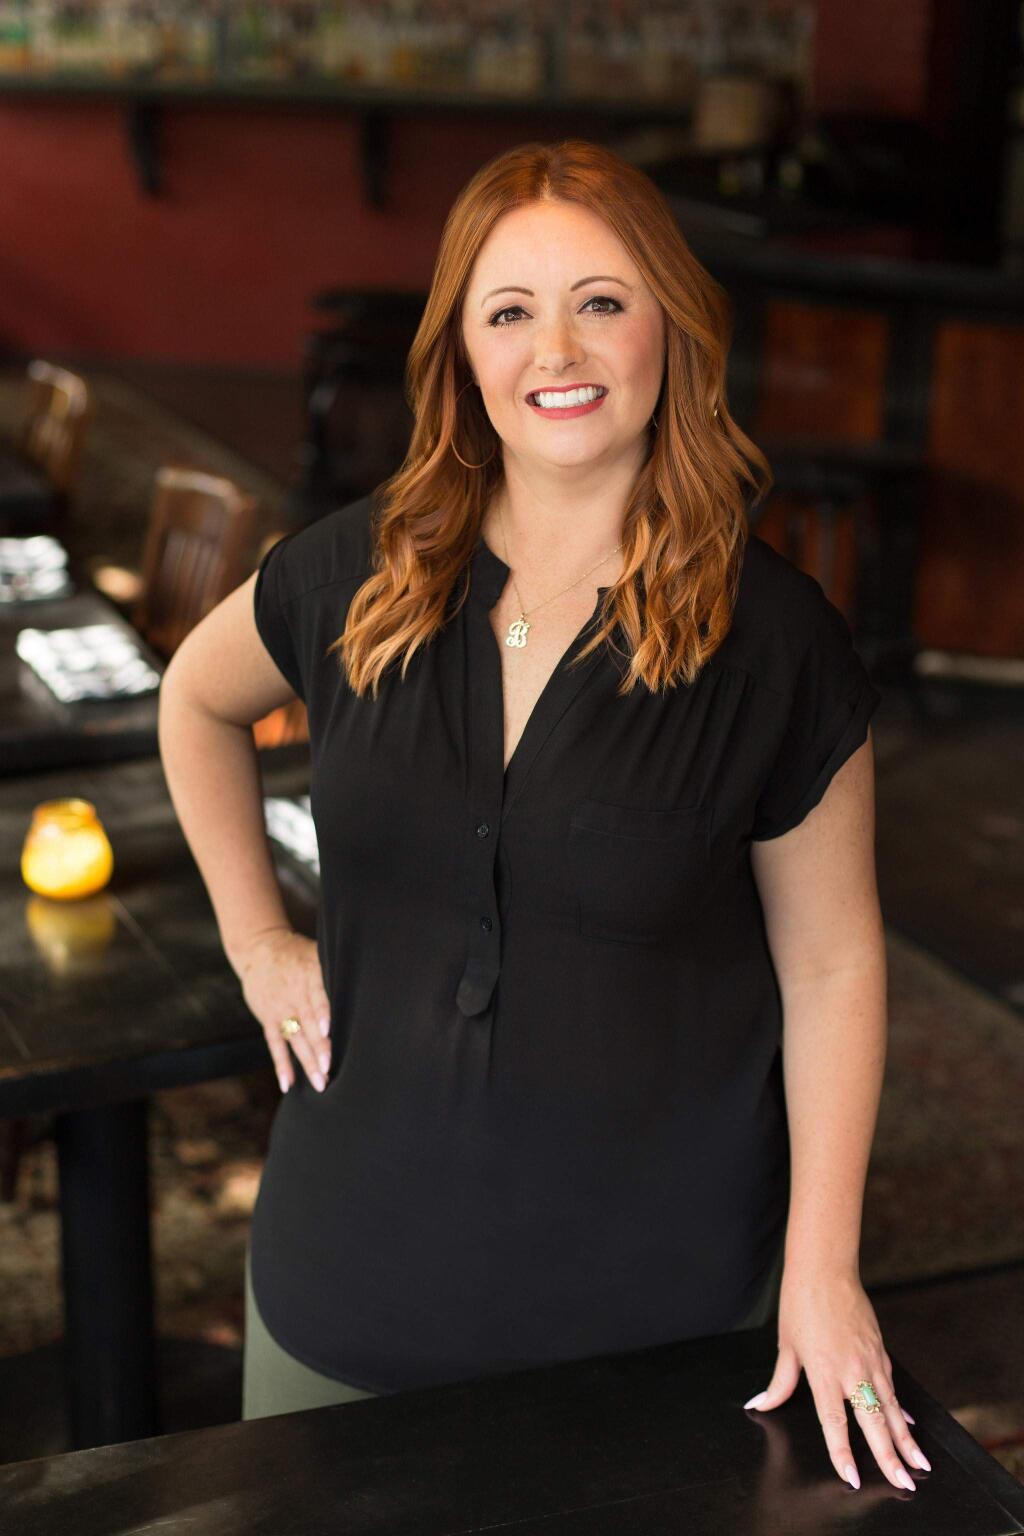 Bonnie Wilson is hired as spirits manager for Don Sebastiani & Sons, a Sonoma-based wine, spirits and sparkling water company, in 2019. (COURTESY PHOTO)